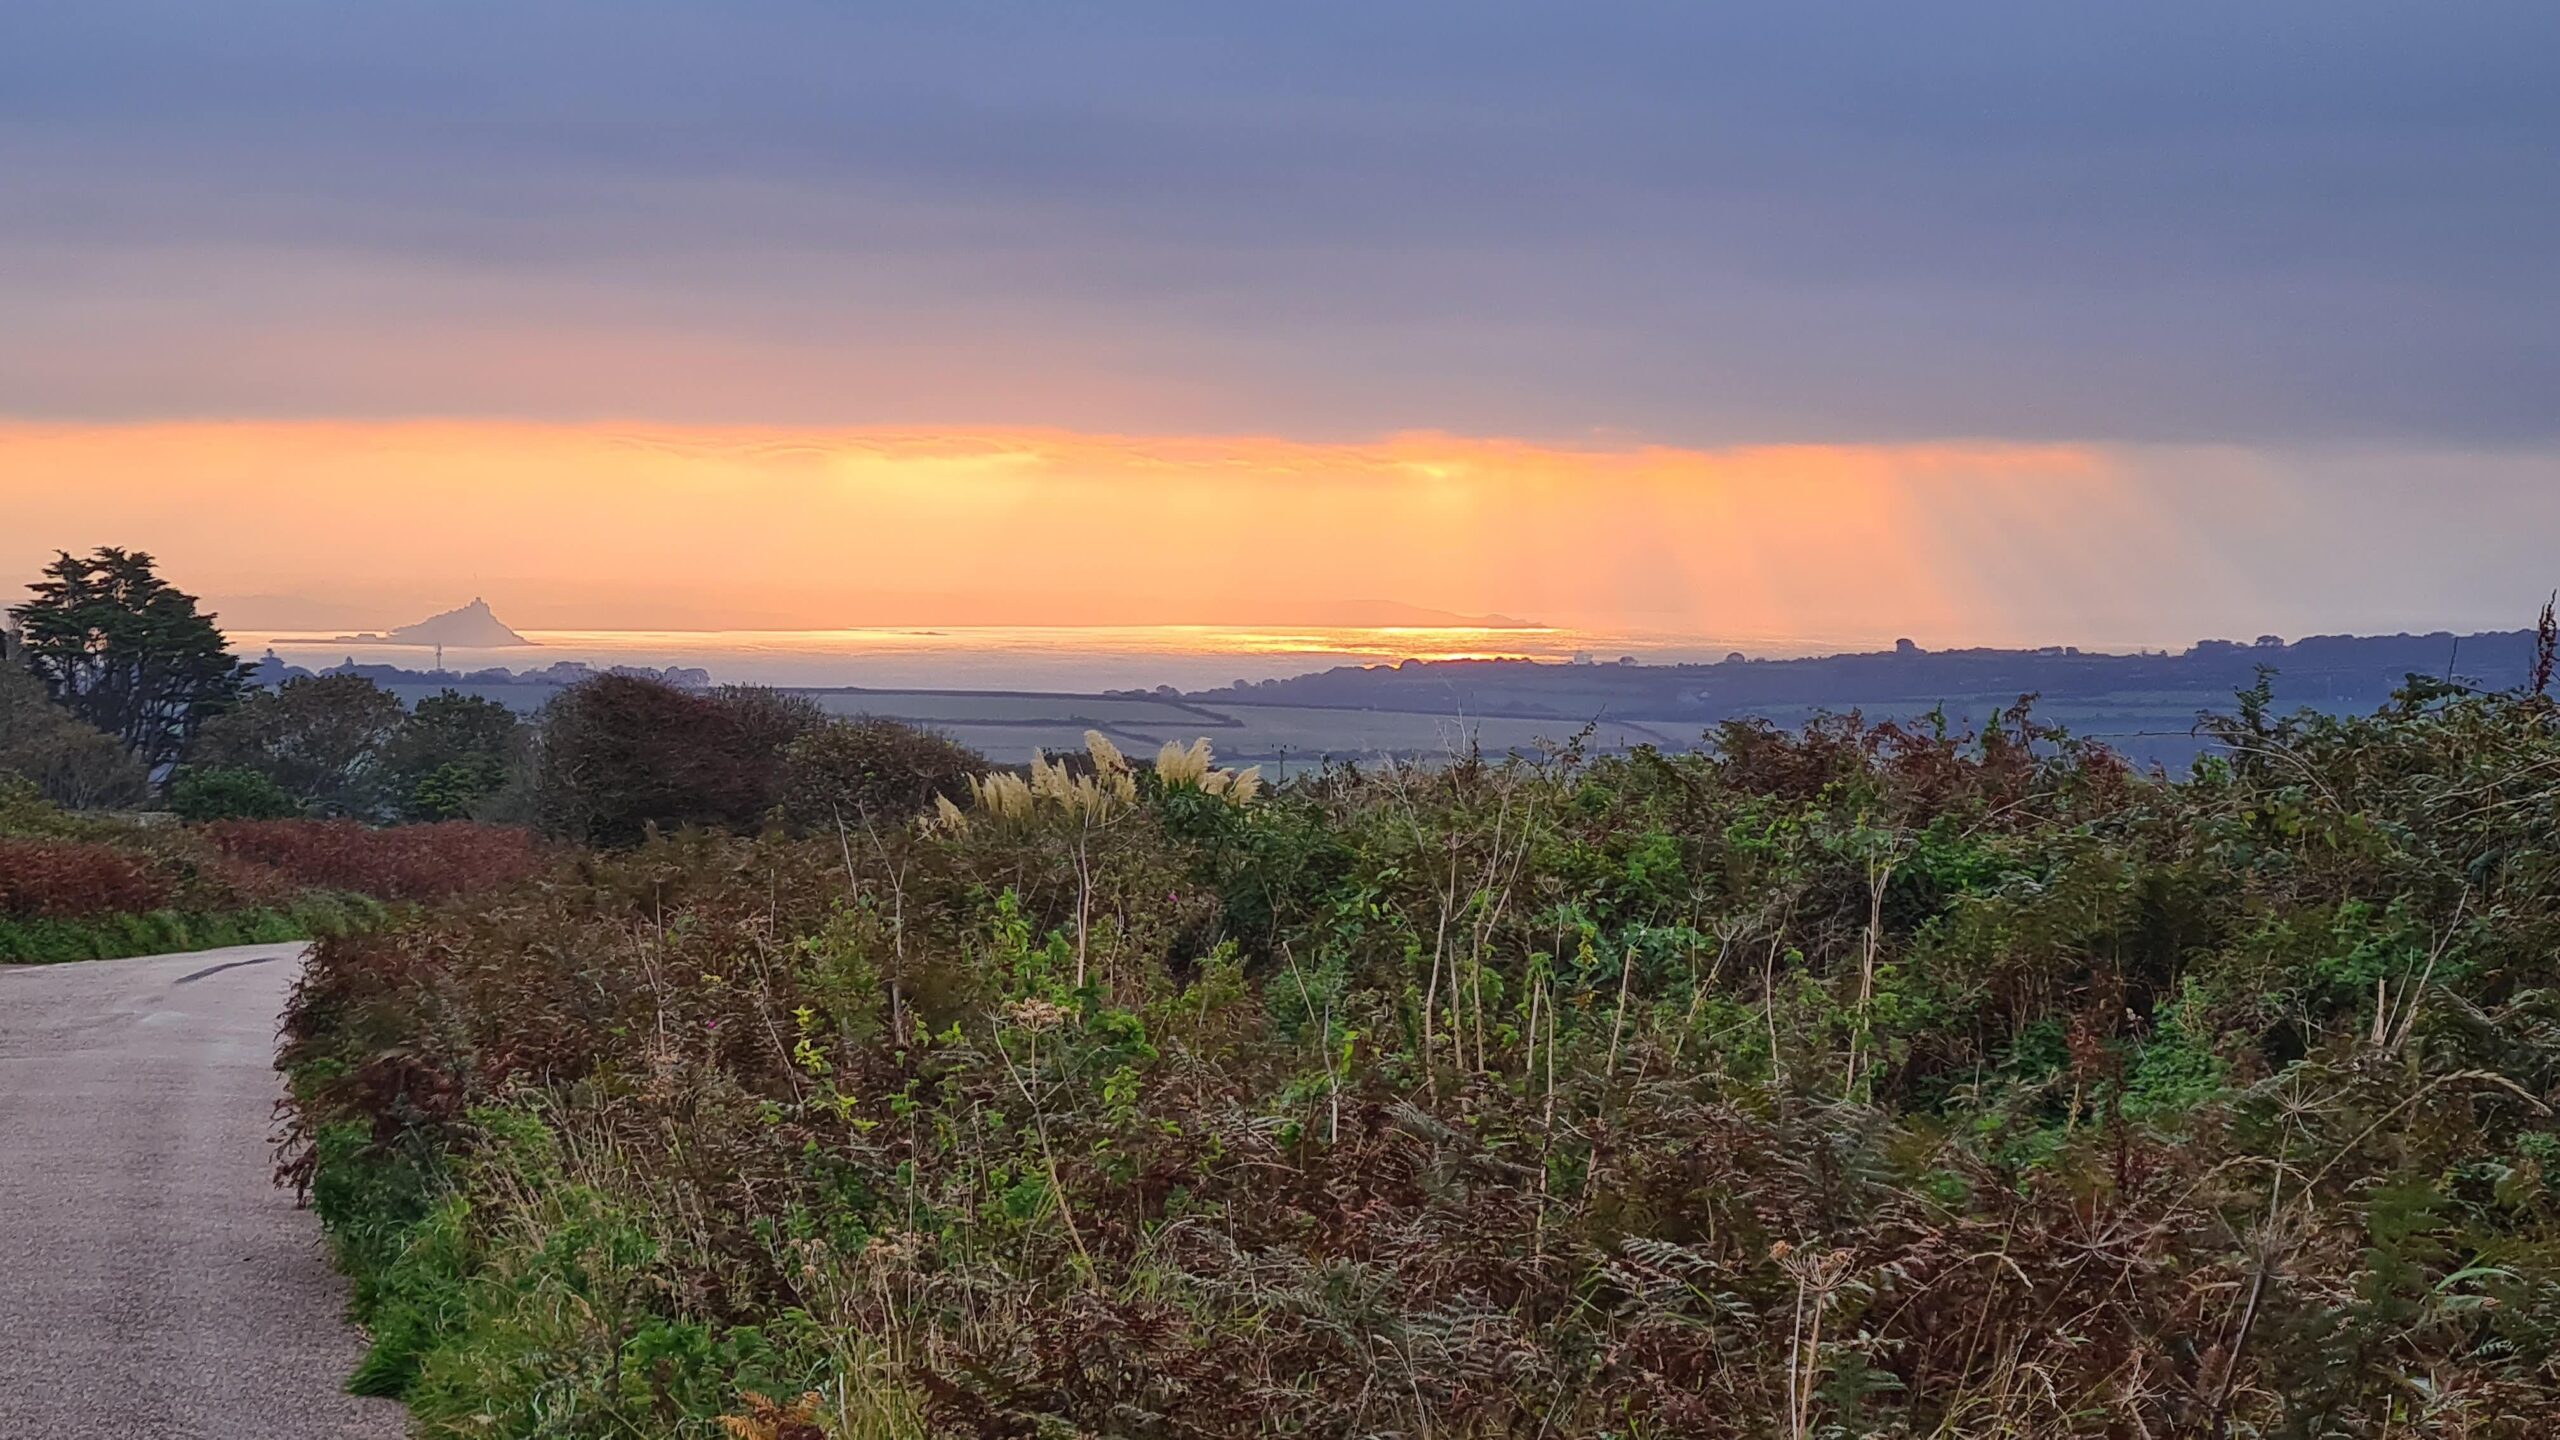 View from Sancreed towards Mounts Bay